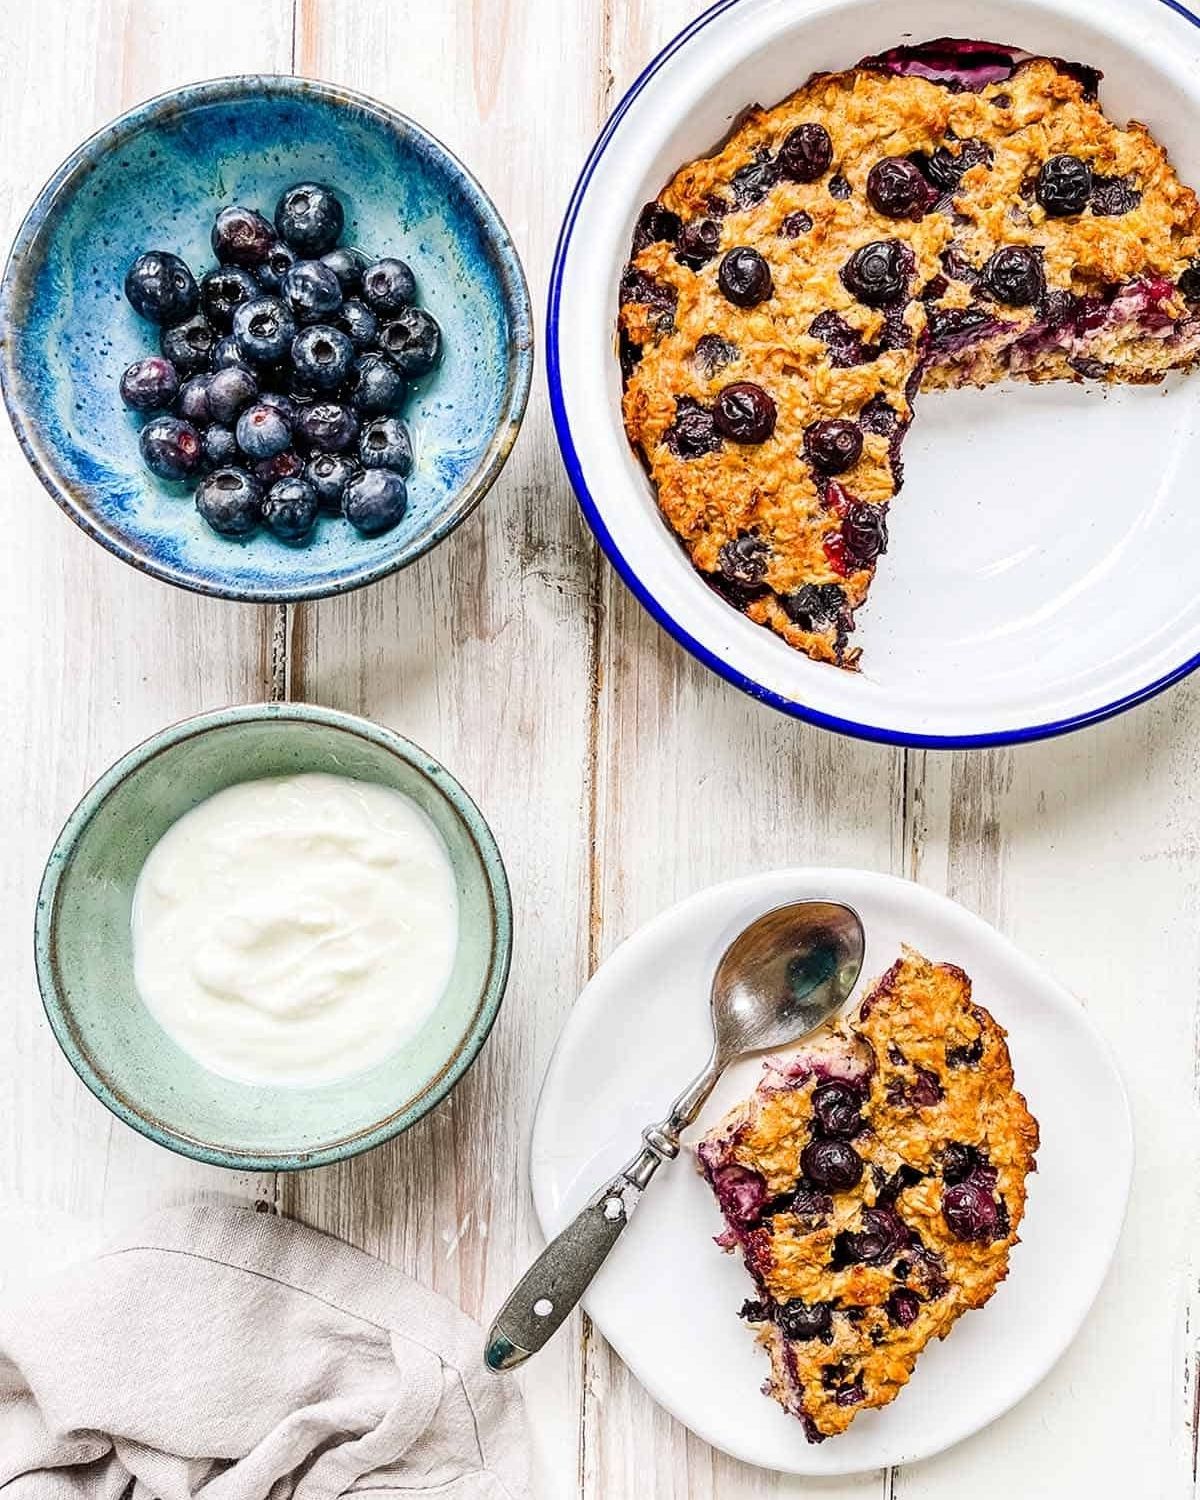 blueberry cake on white plate by green bowl of yogurt